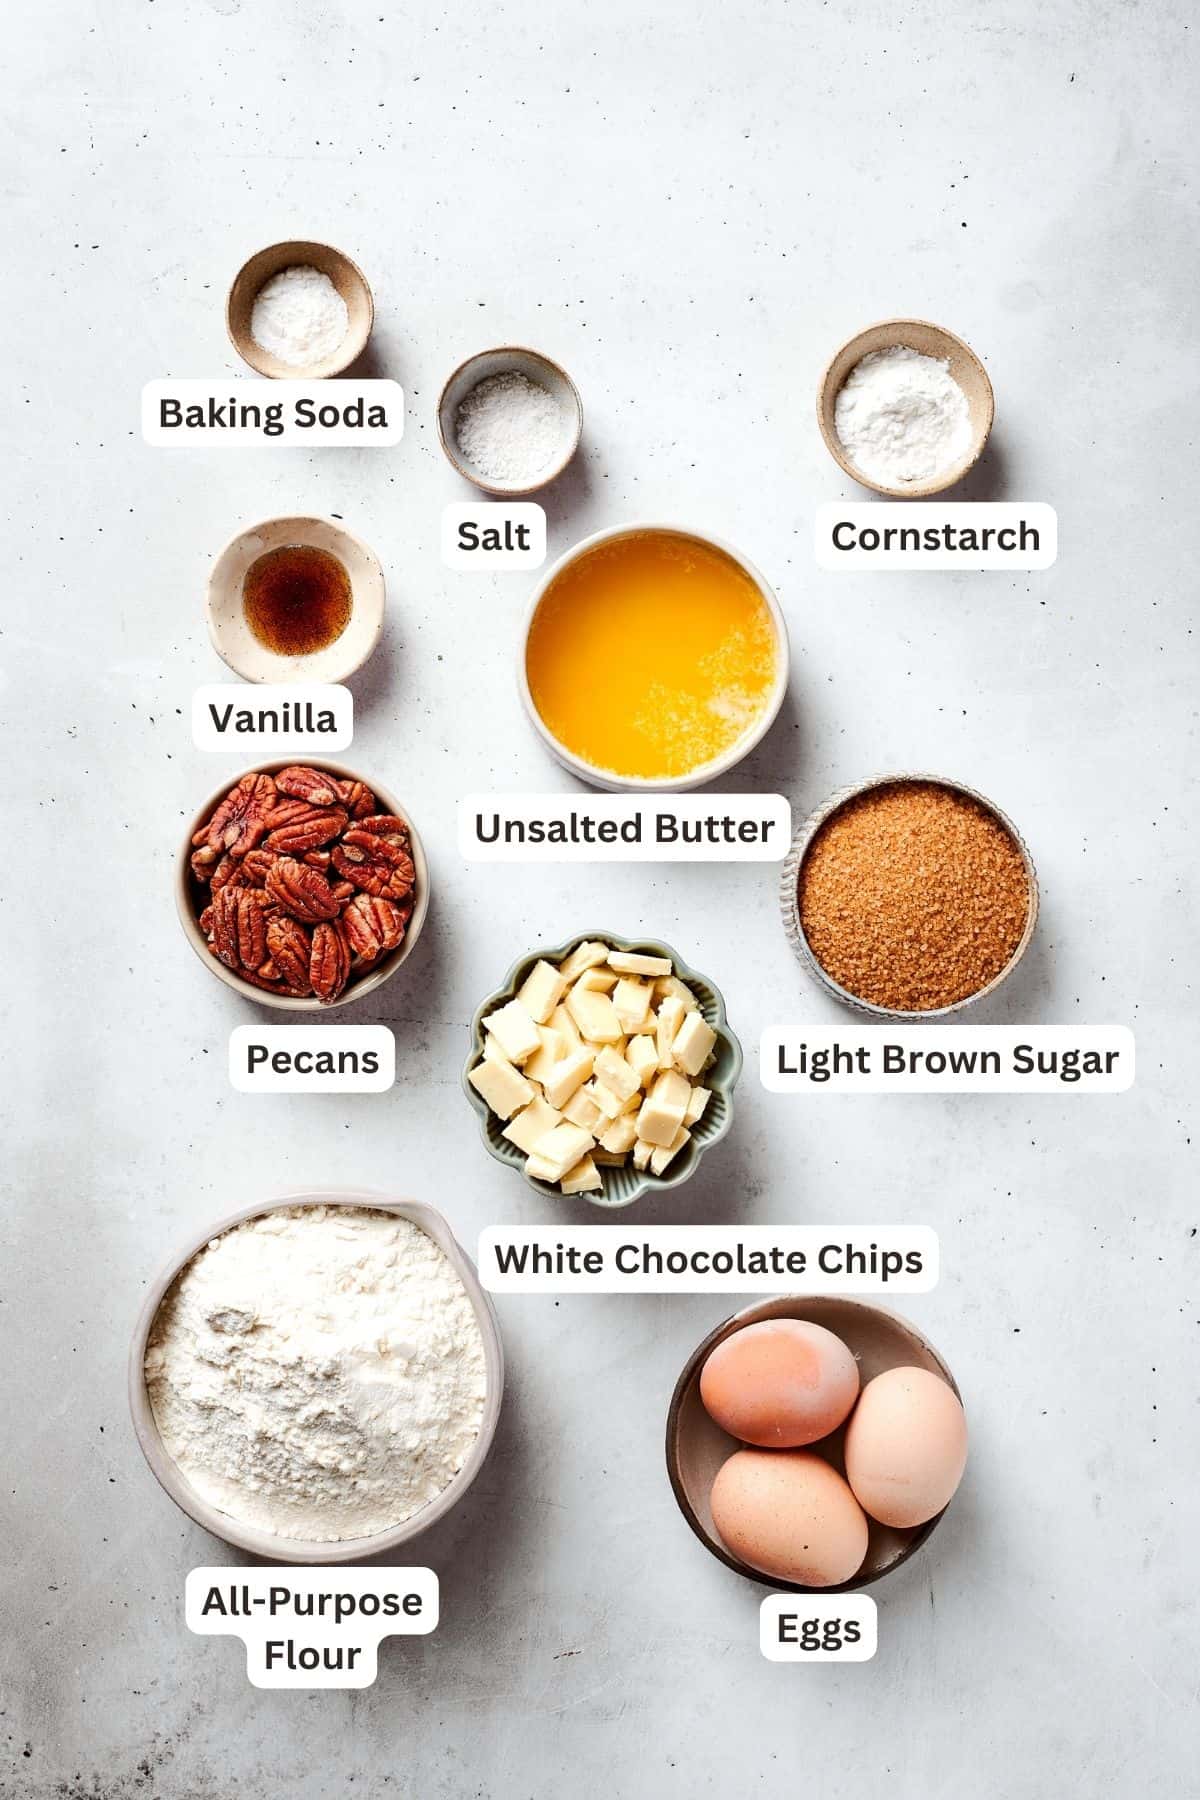 The ingredients for blonde brownies are shown portioned out: flour, cornstarch, baking soda, salt, vanilla, brown sugar, melted butter, eggs, pecans, white chocolate chips.